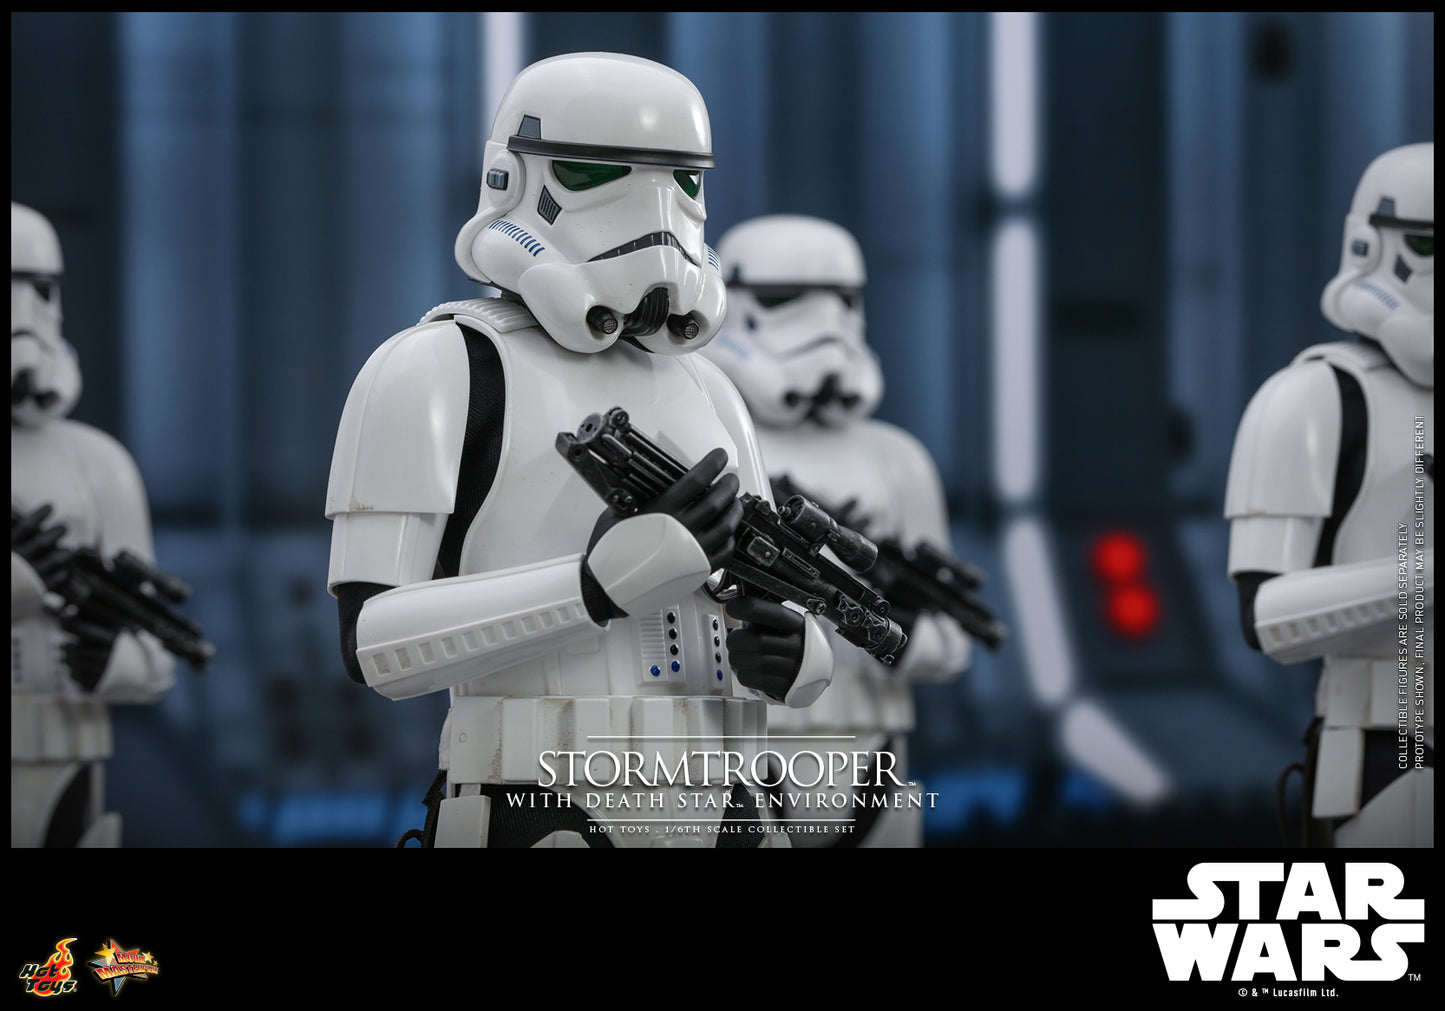 Star Wars - Stormtrooper (with Death Star Environment) 1:6 Scale Collectable Action Figure